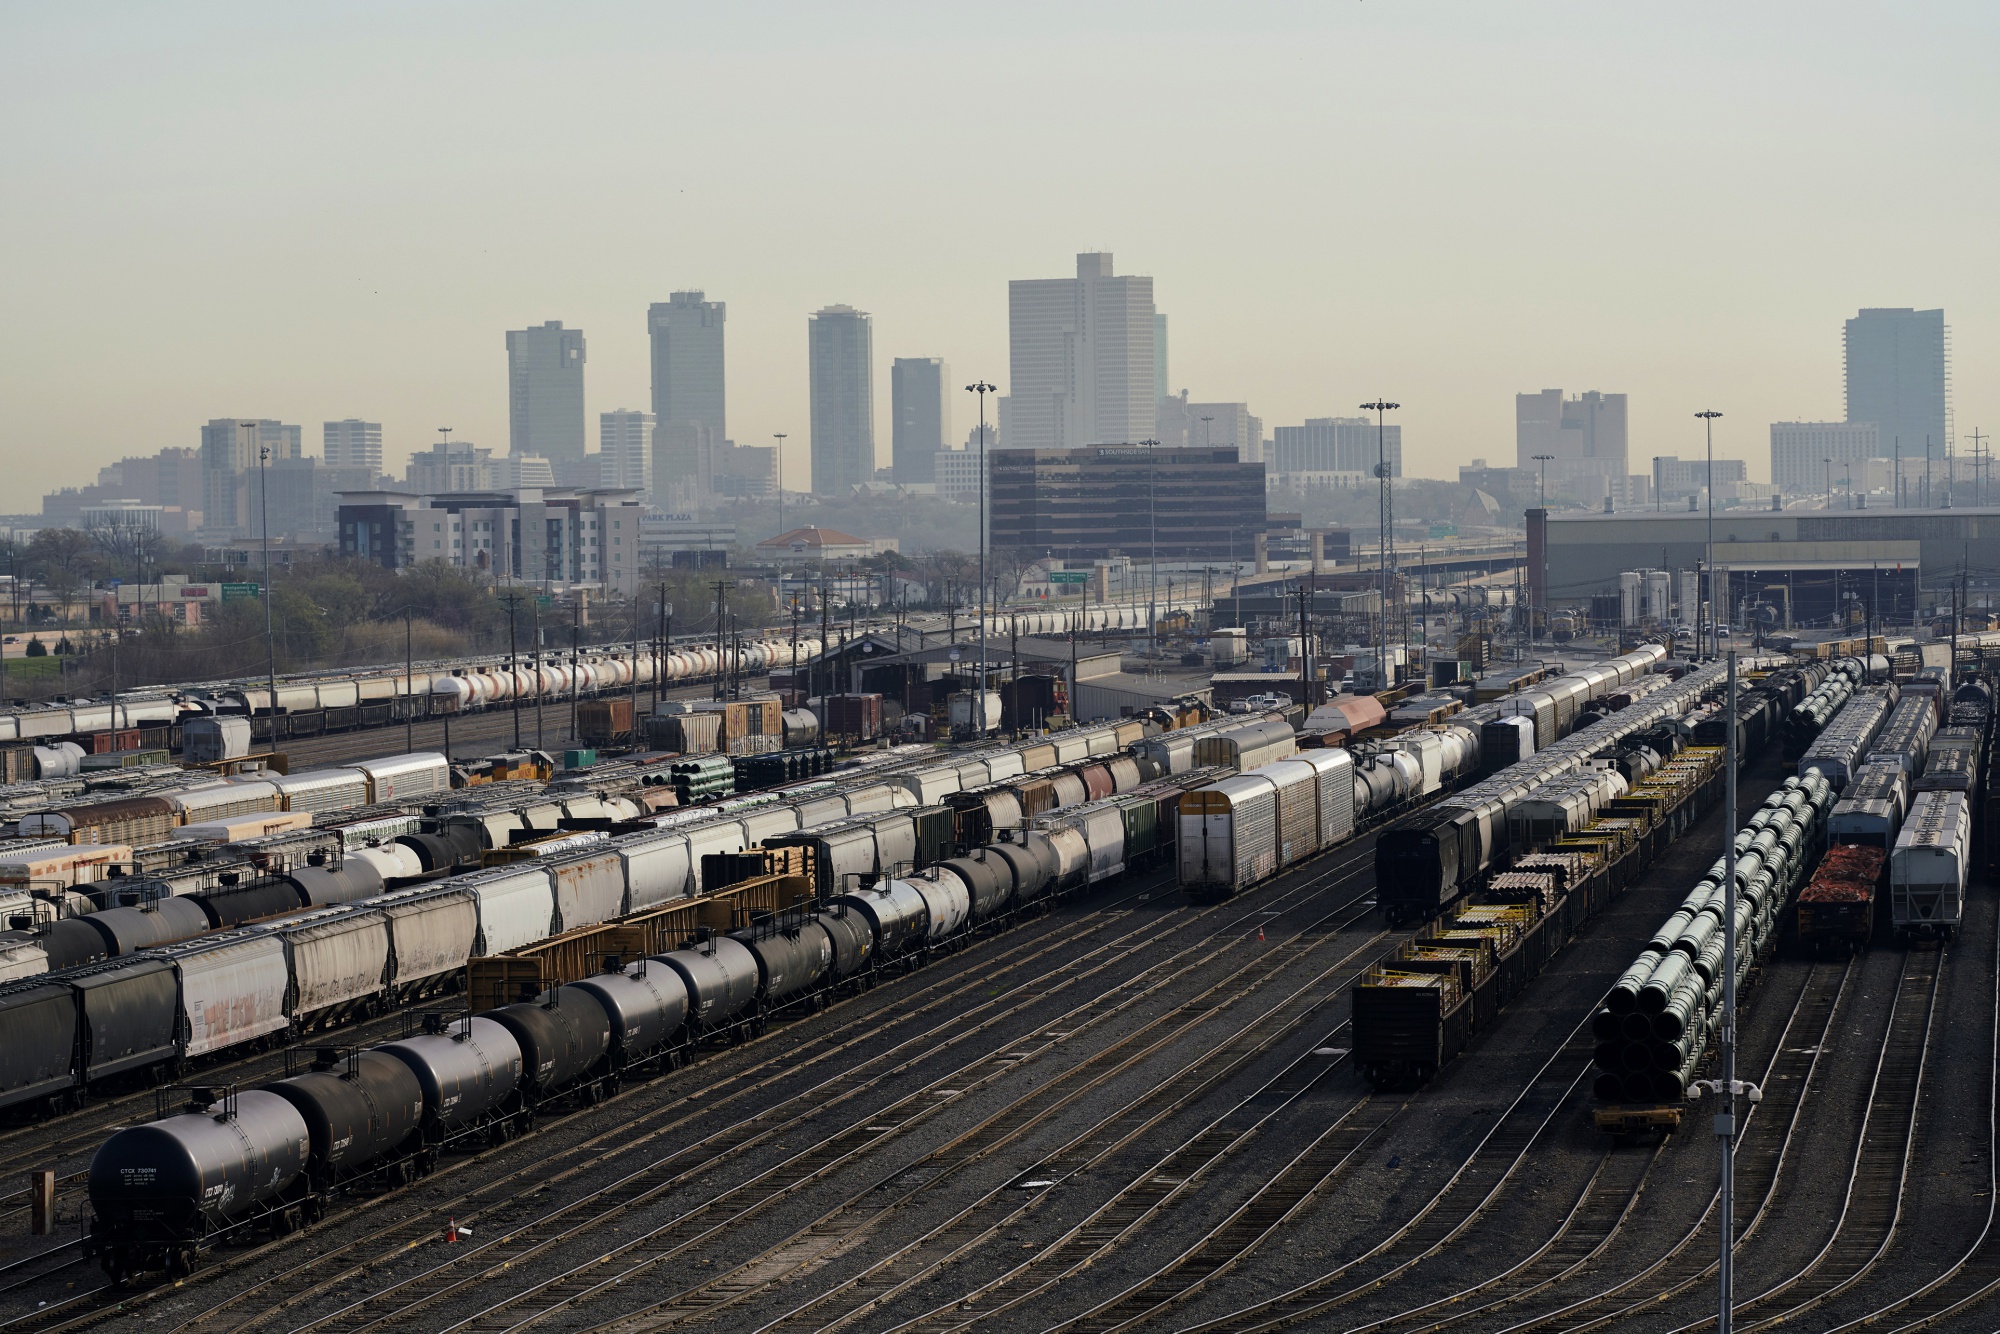 Rail reform – What does it mean for freight and open access operations?